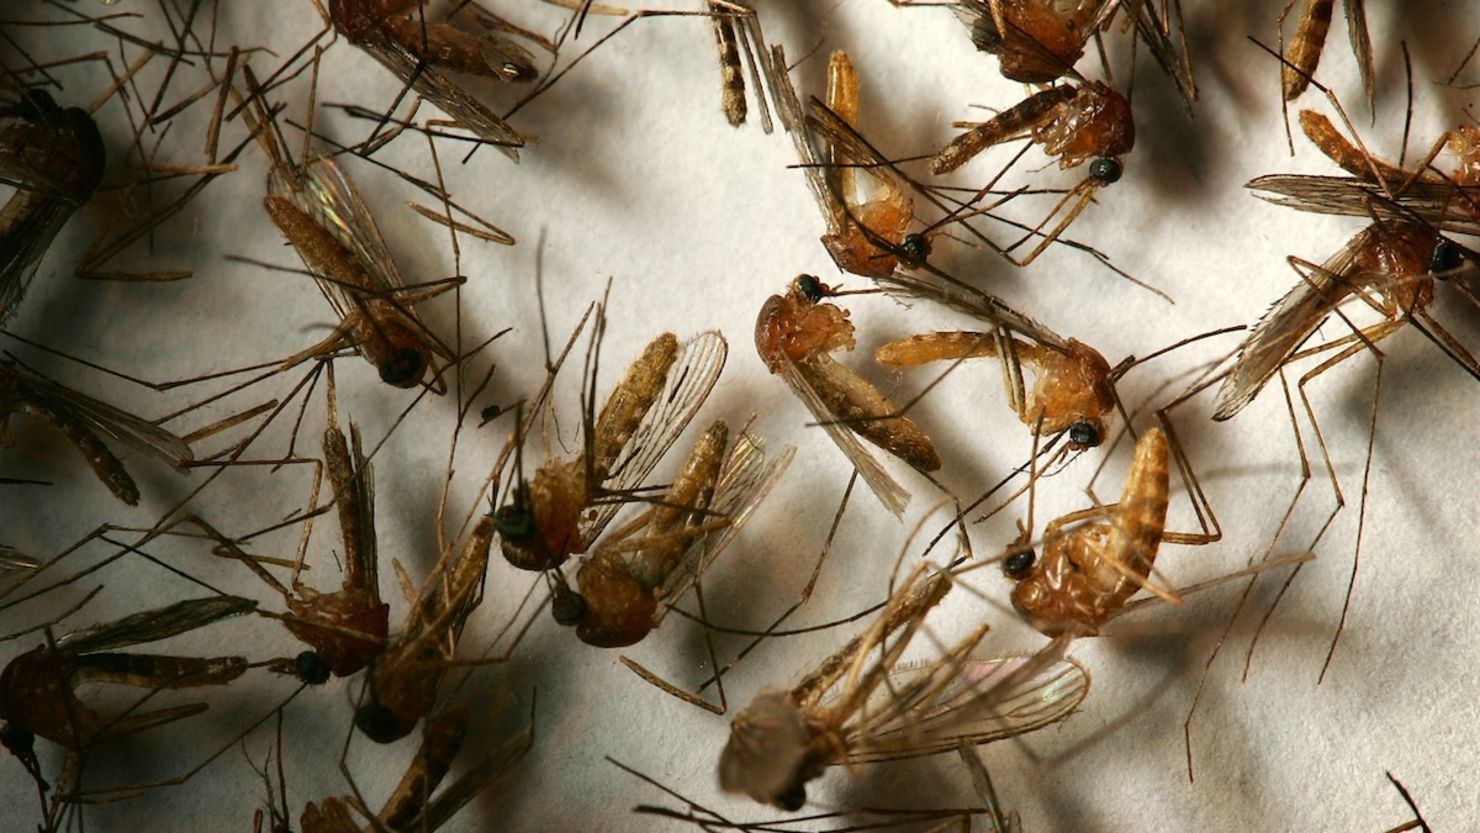 Mosquitoes spread dengue fever, cases of "have grown dramatically" according to the World Health Organization.